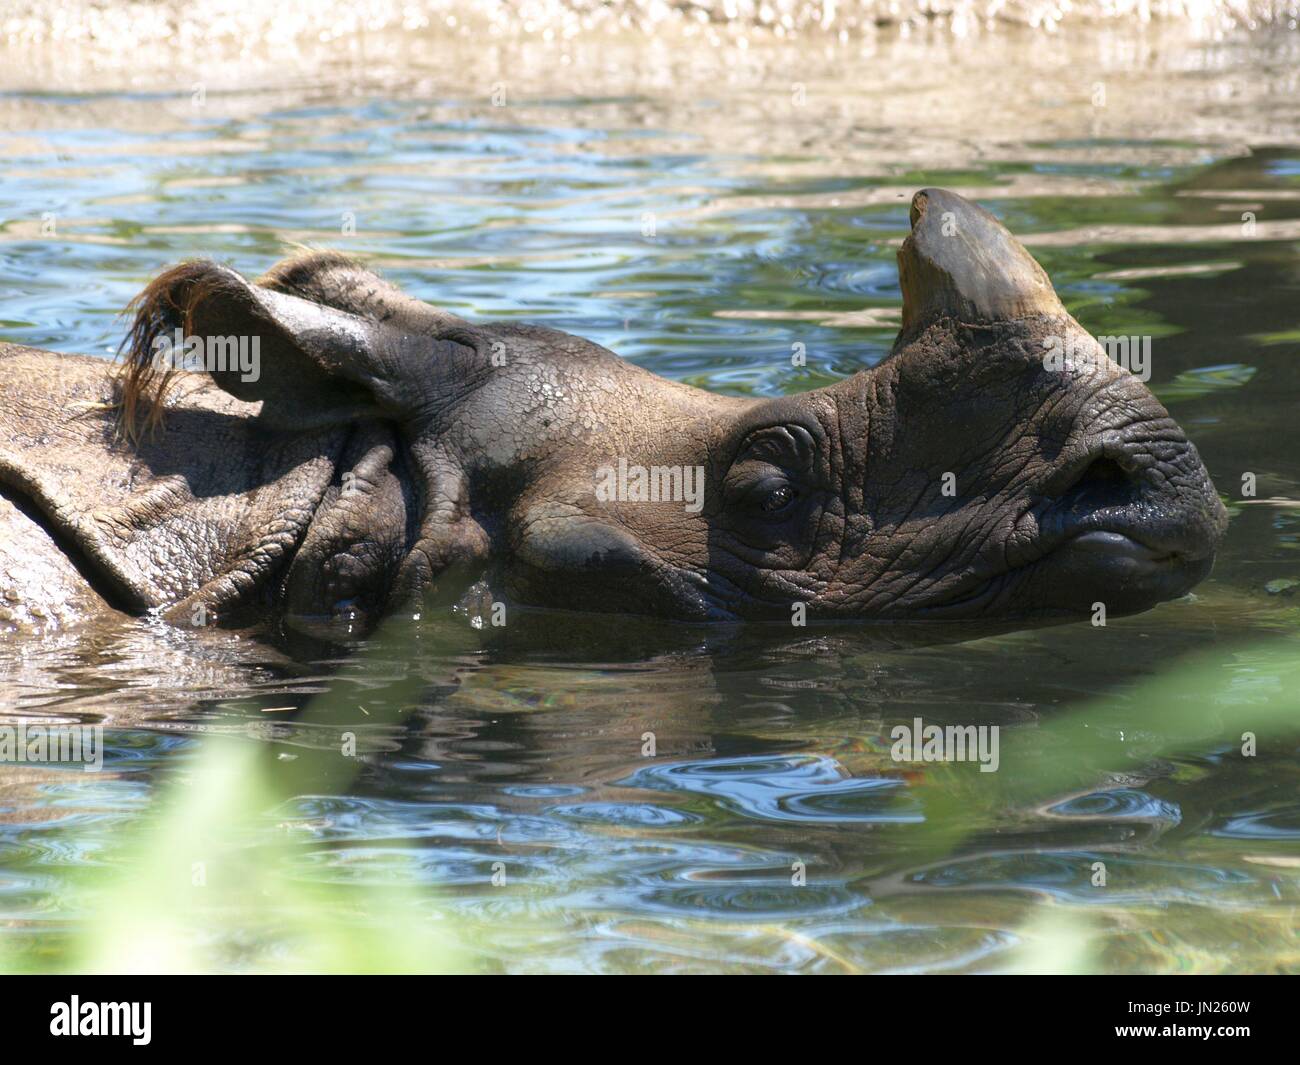 Rhinocerous with head and horn sticking out of water Stock Photo